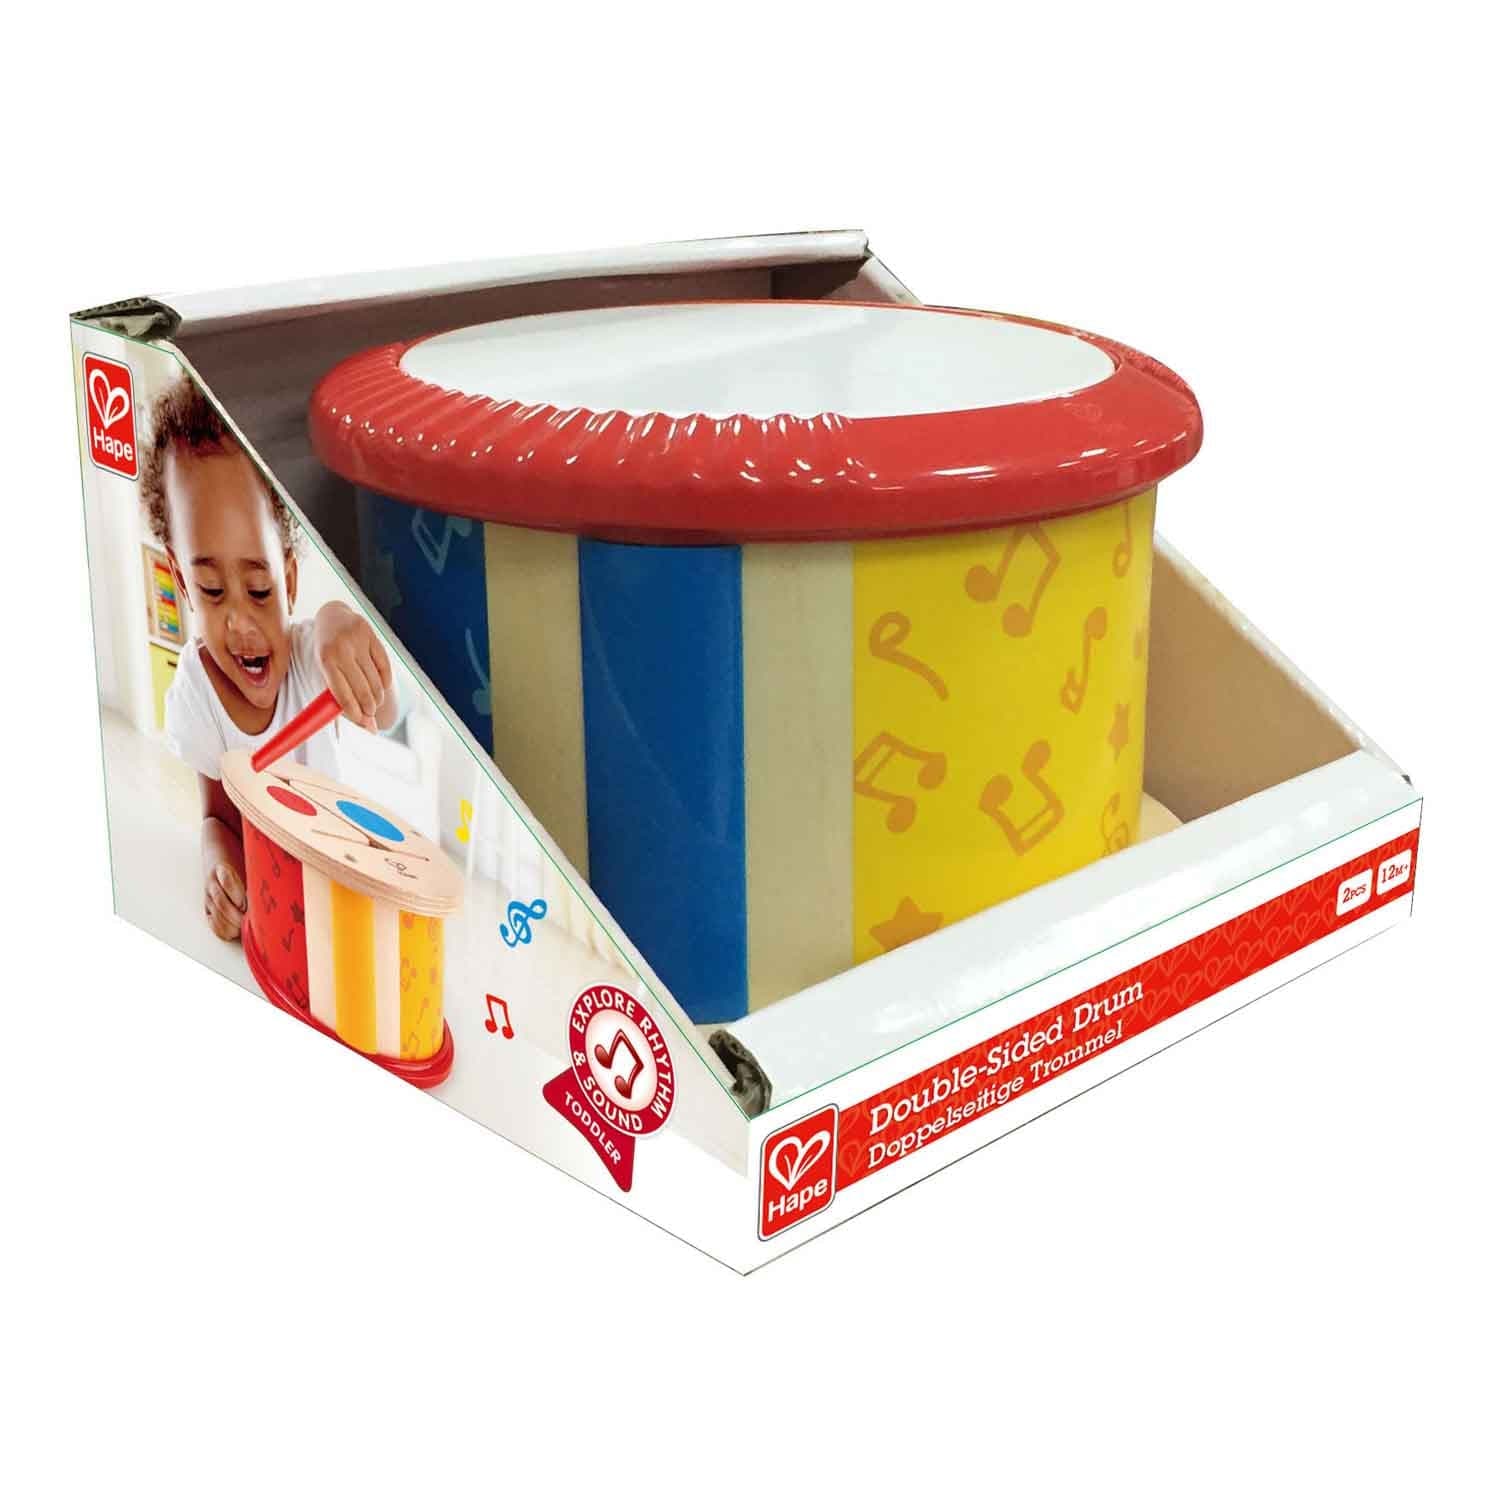 Hape-Double Sided Drum-E0608-Legacy Toys